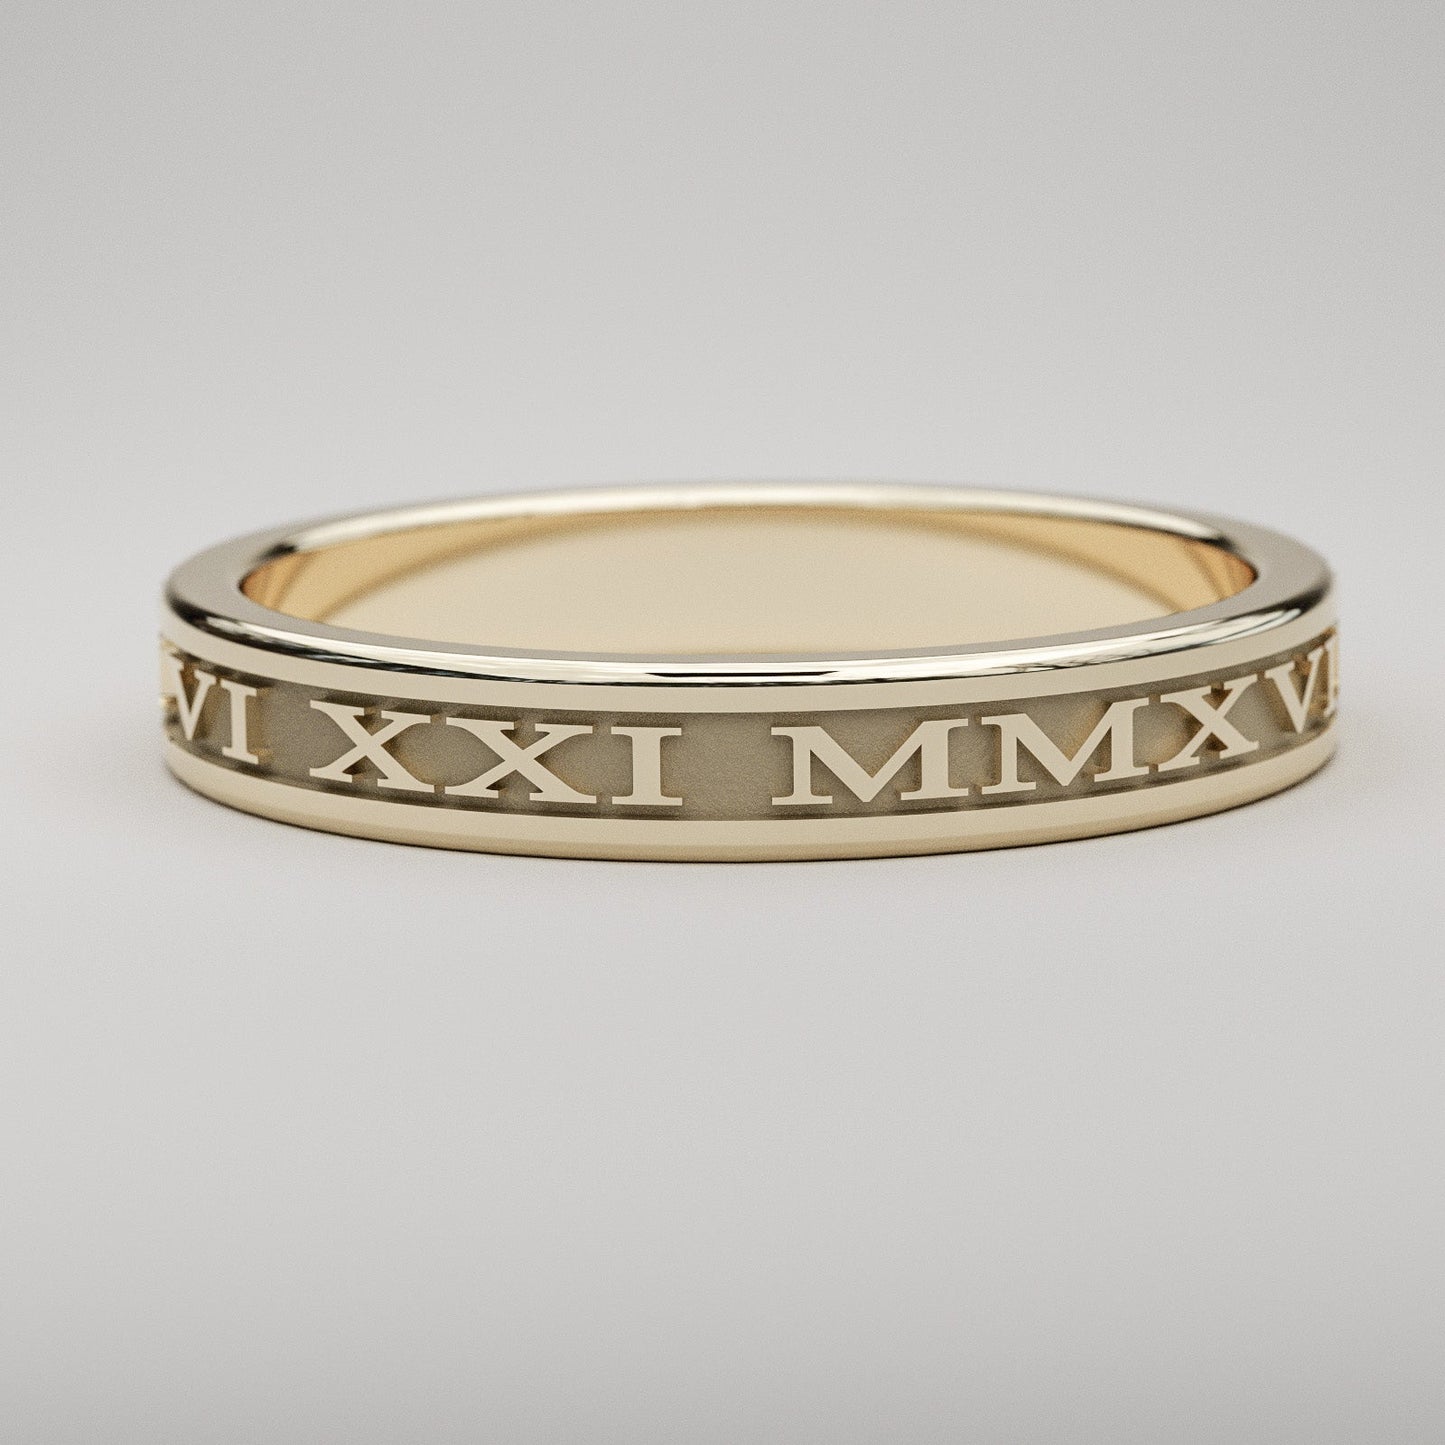 Roman Numeral solid 14k yellow gold ring custom made with your special date